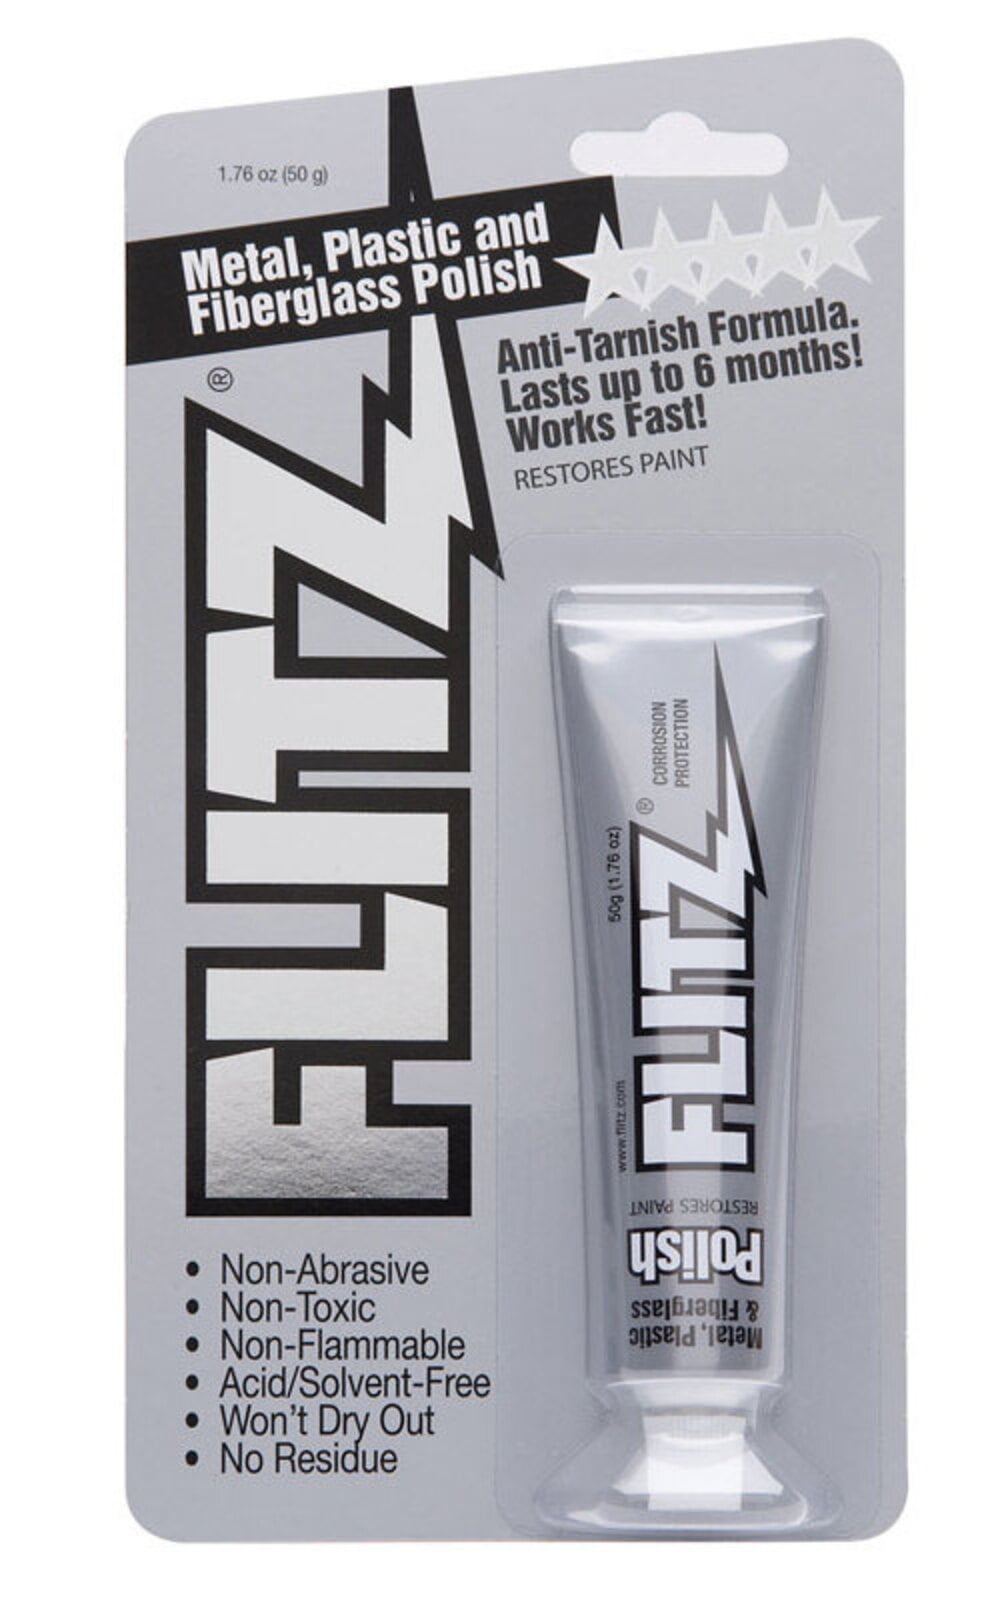 Flitz Multi-Purpose Polish and Cleaner Paste for Metal, Plastic,  Fiberglass, Aluminum, Jewelry, Sterling Silver: Great for Headlight  Restoration and